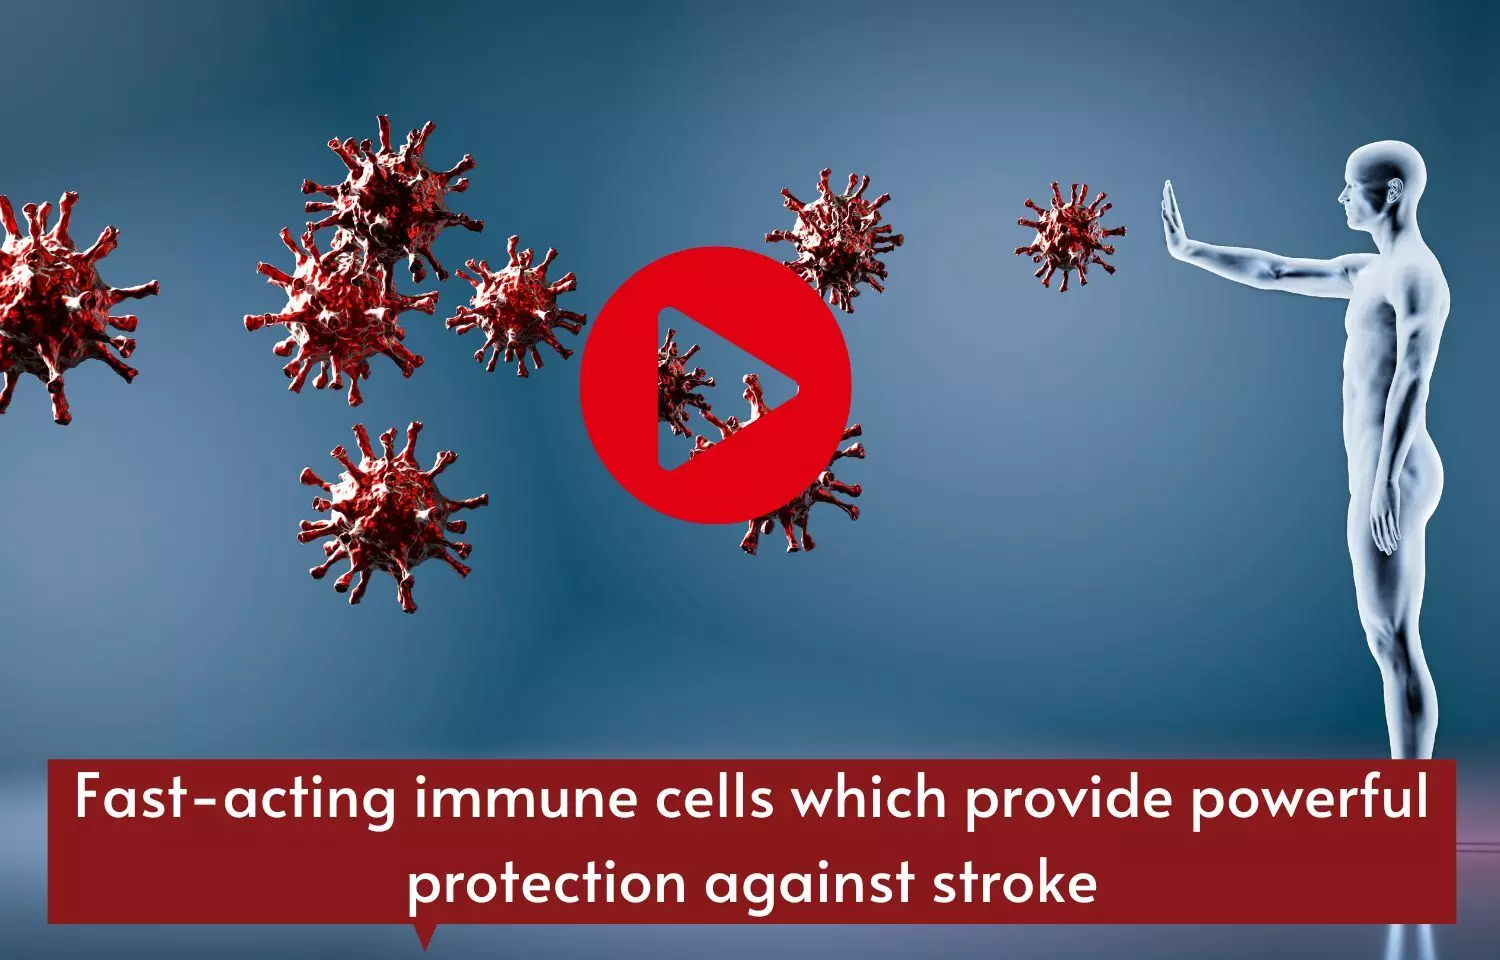 Fast-acting immune cells which provide powerful protection against stroke